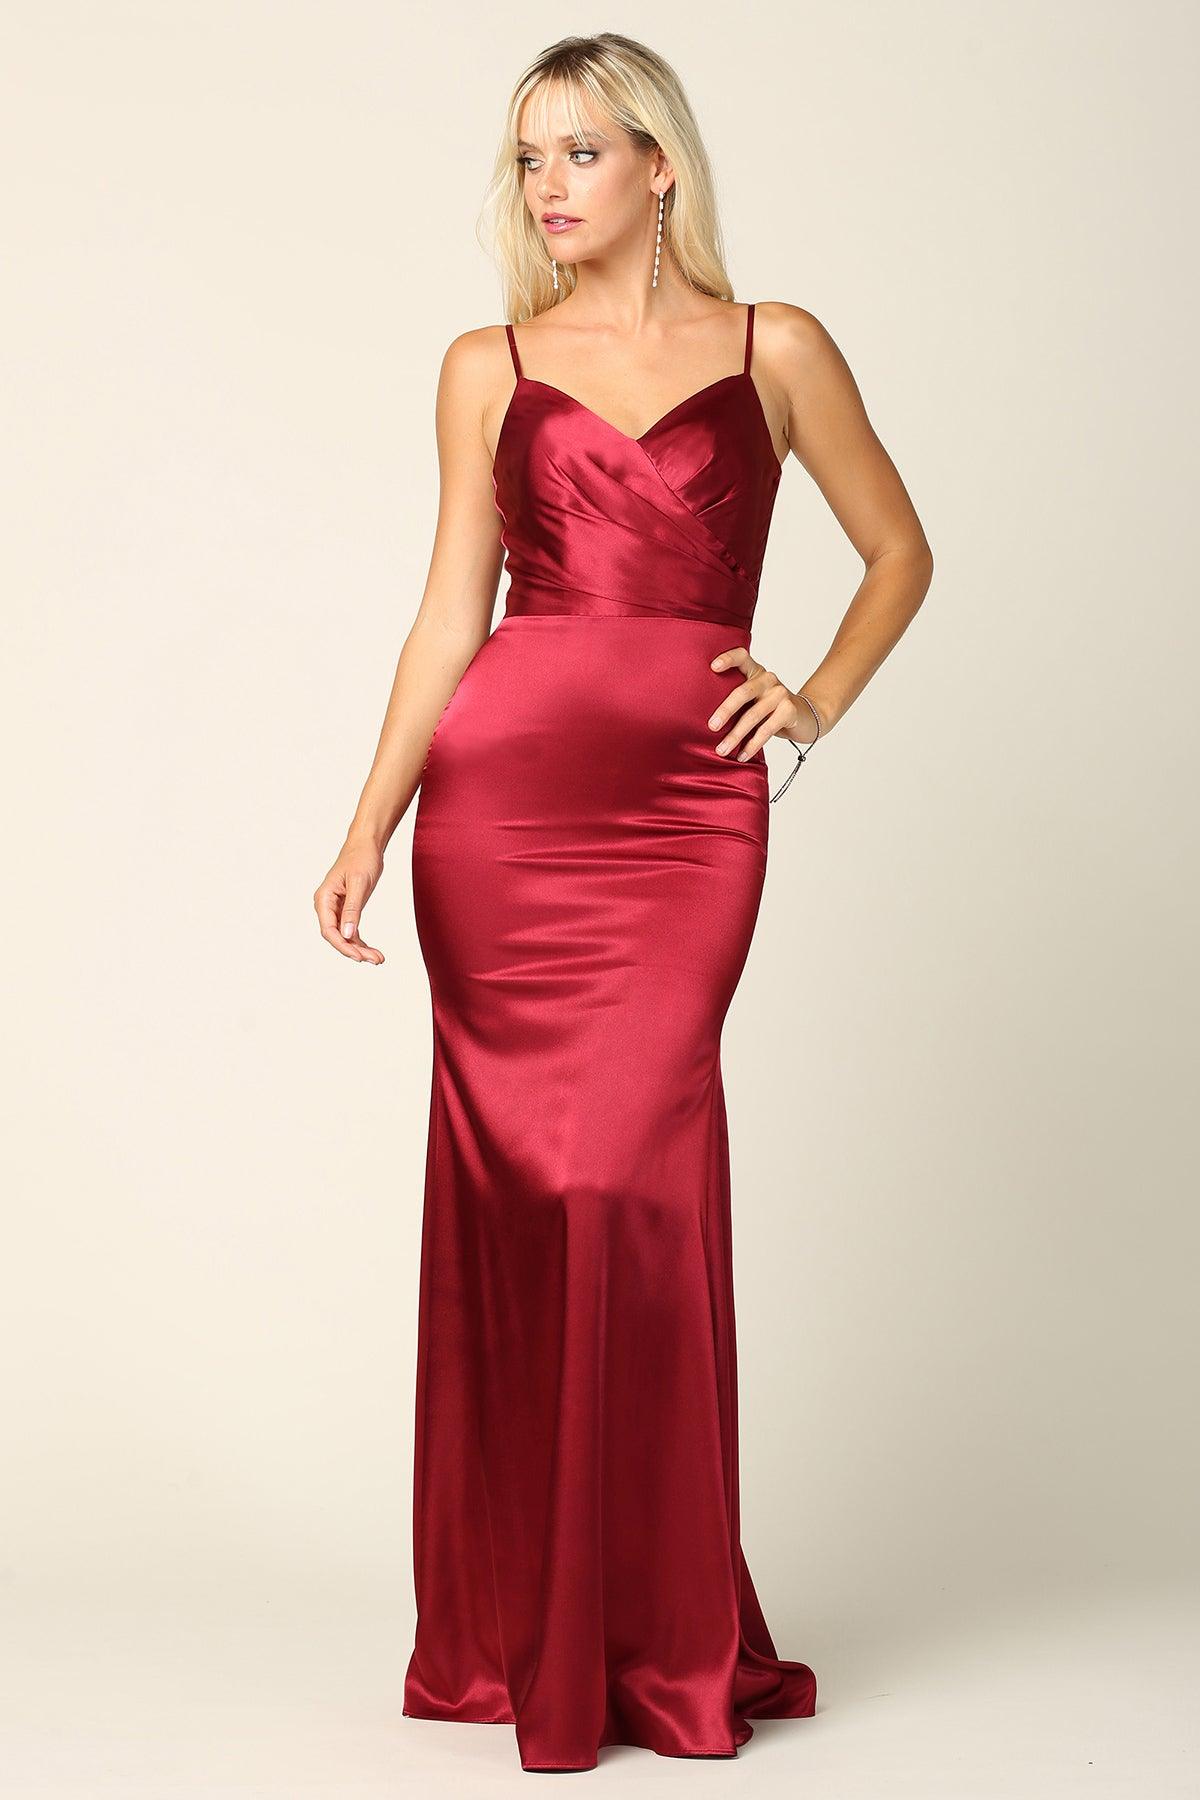 Long Spaghetti Strap Formal Dress Bridesmaids - The Dress Outlet